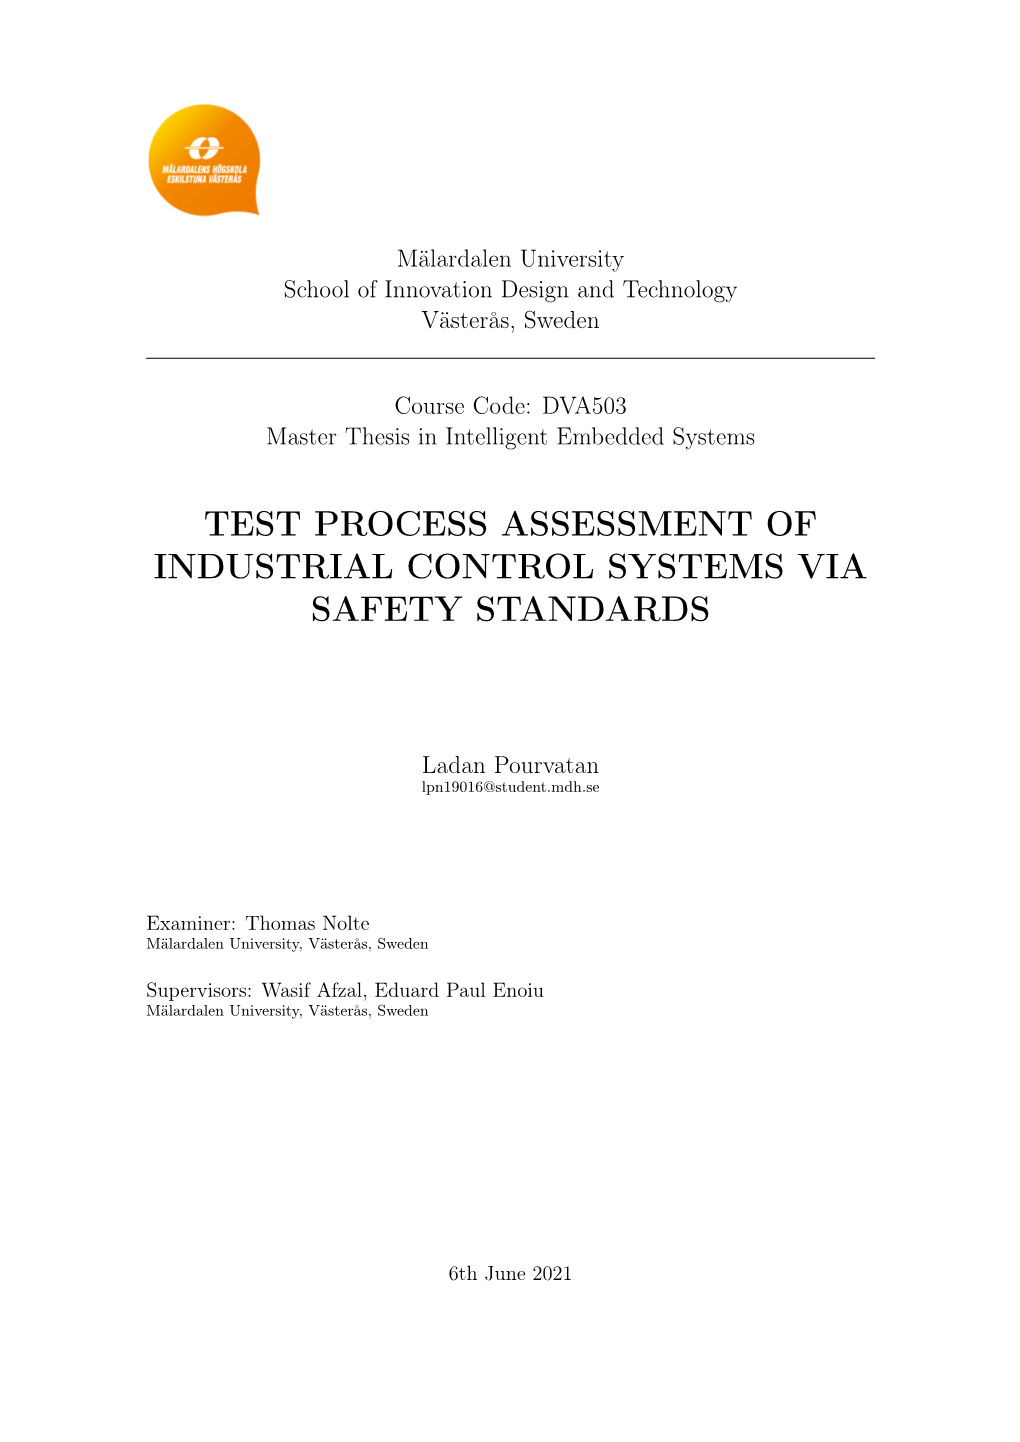 Test Process Assessment of Industrial Control Systems Via Safety Standards